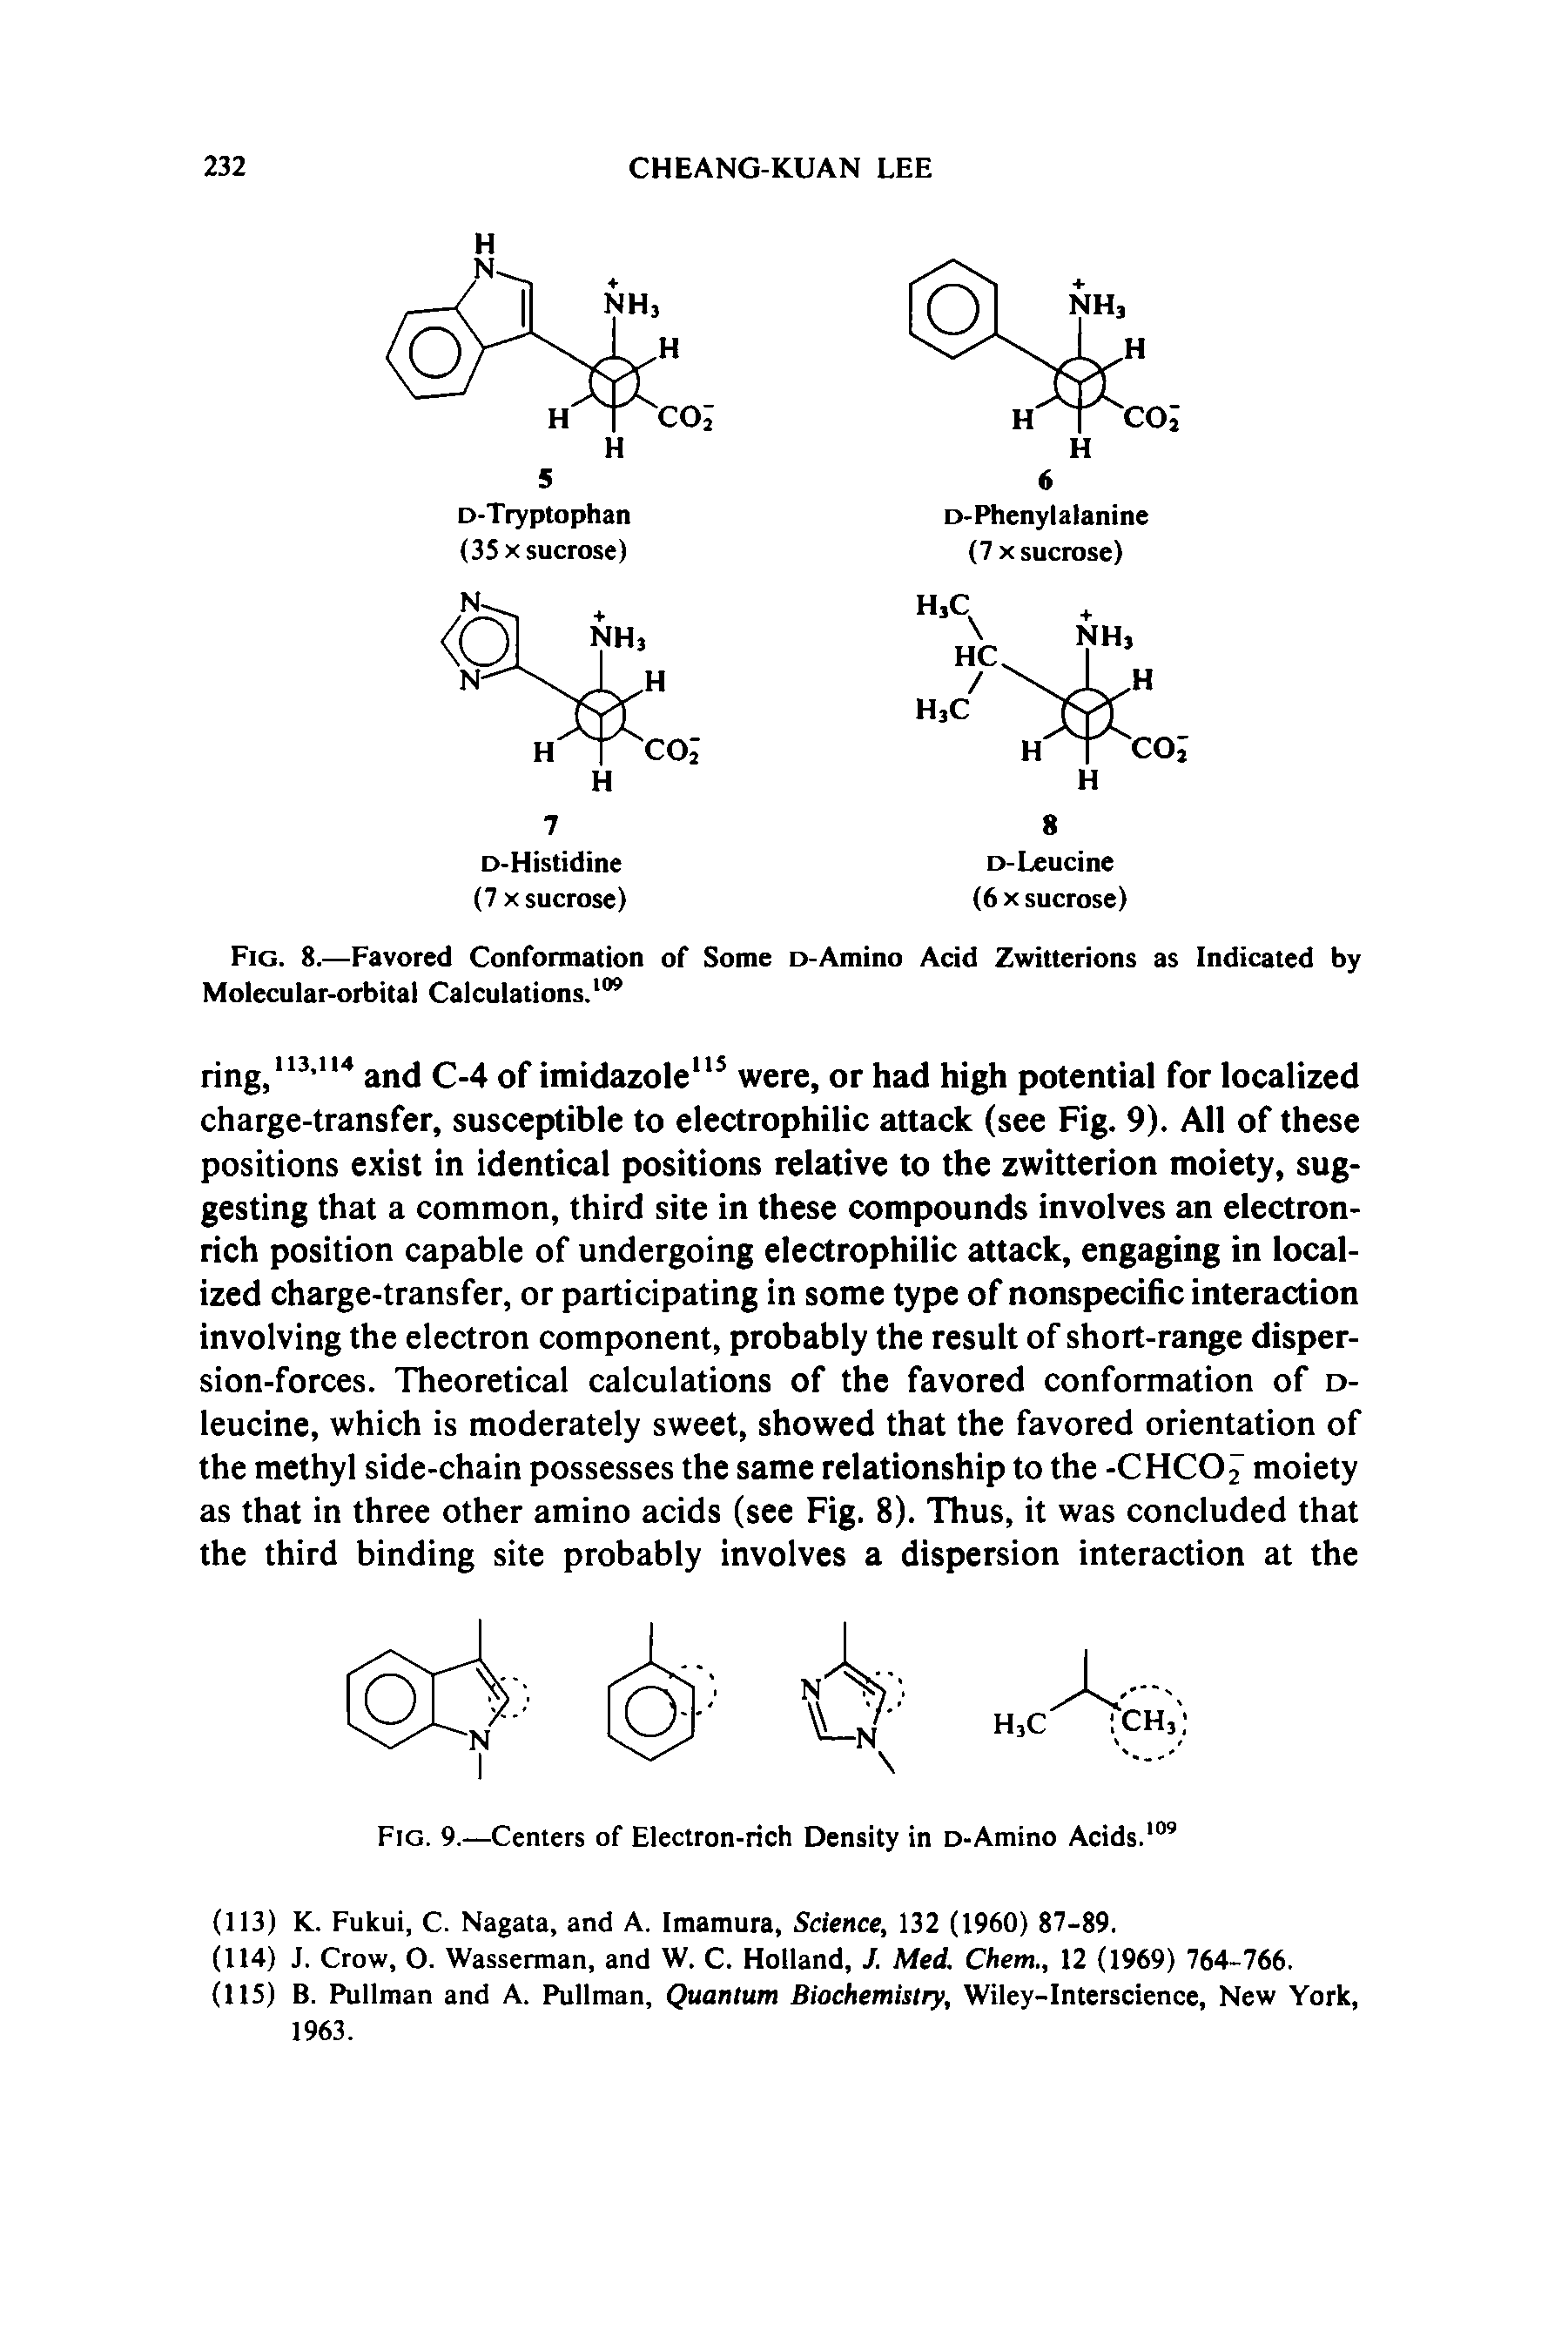 Fig. 8.—Favored Conformation of Some o-Amino Acid Zwitterions as Indicated by Molecular-orbital Calculations. ...